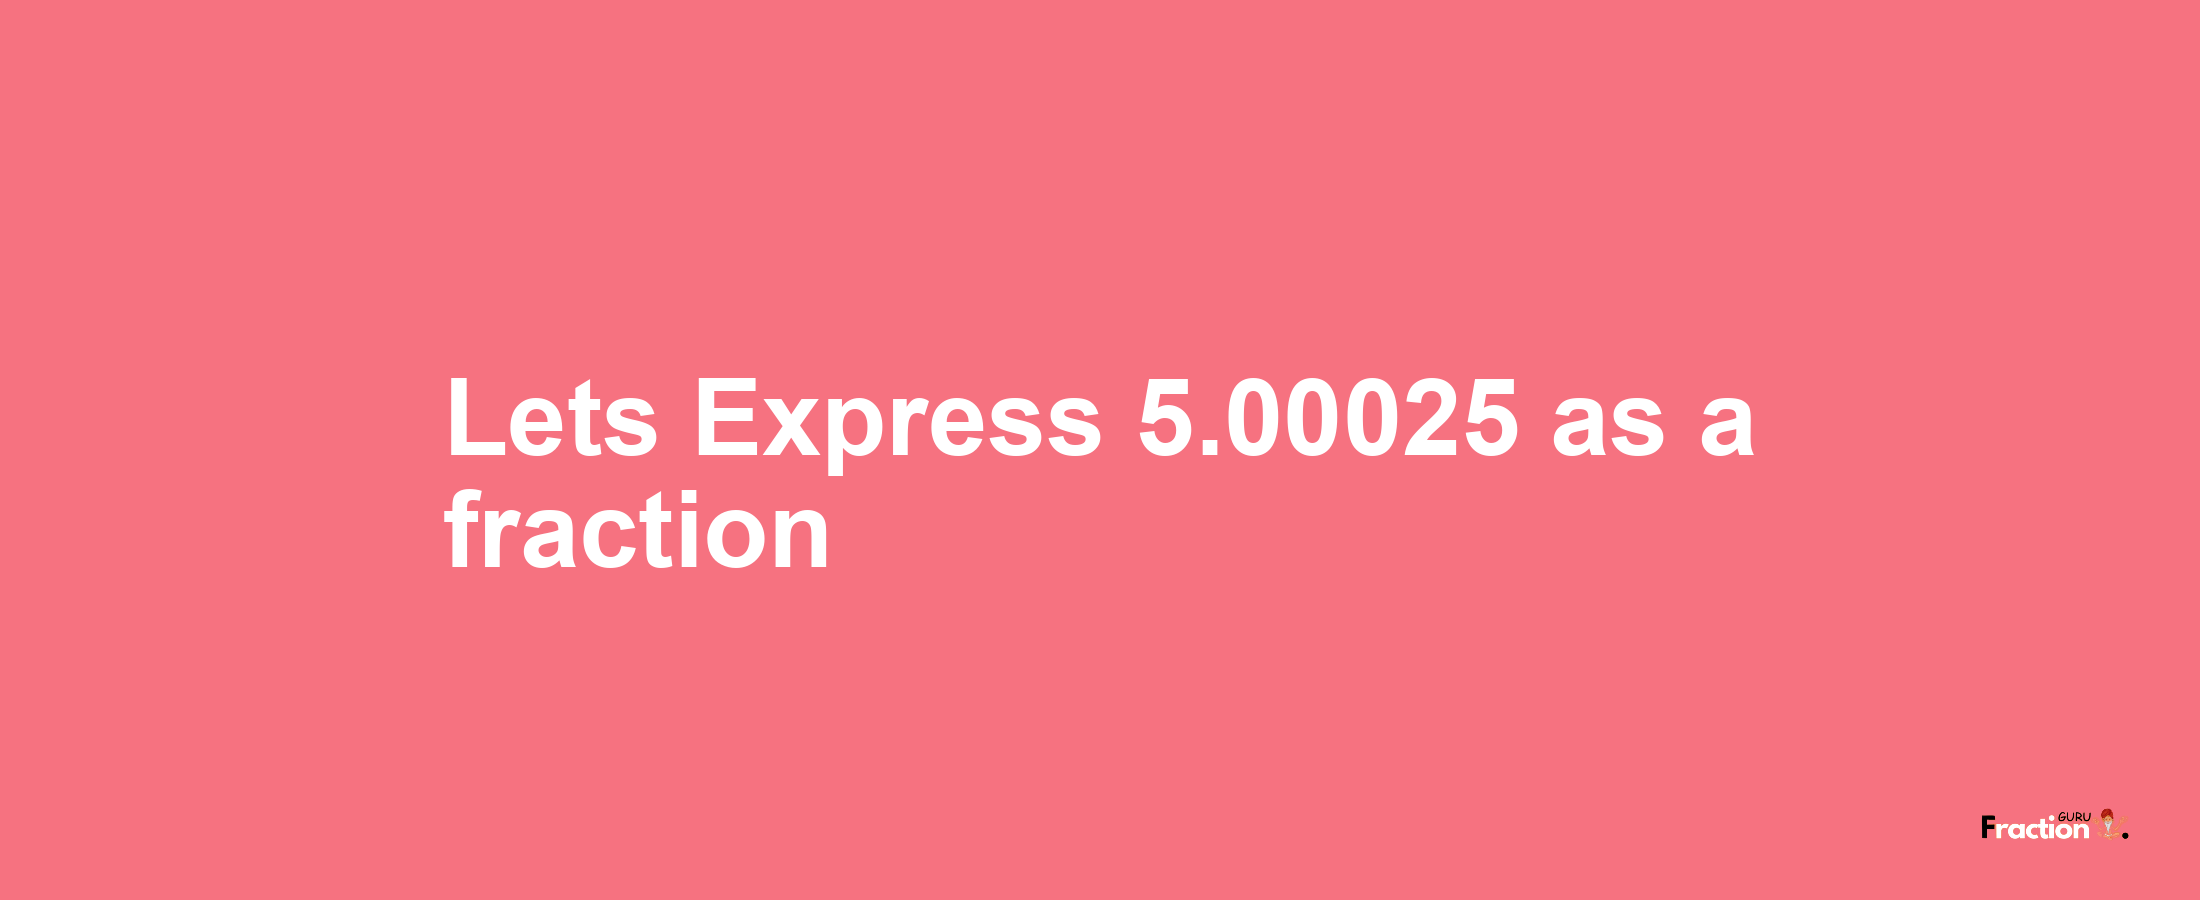 Lets Express 5.00025 as afraction